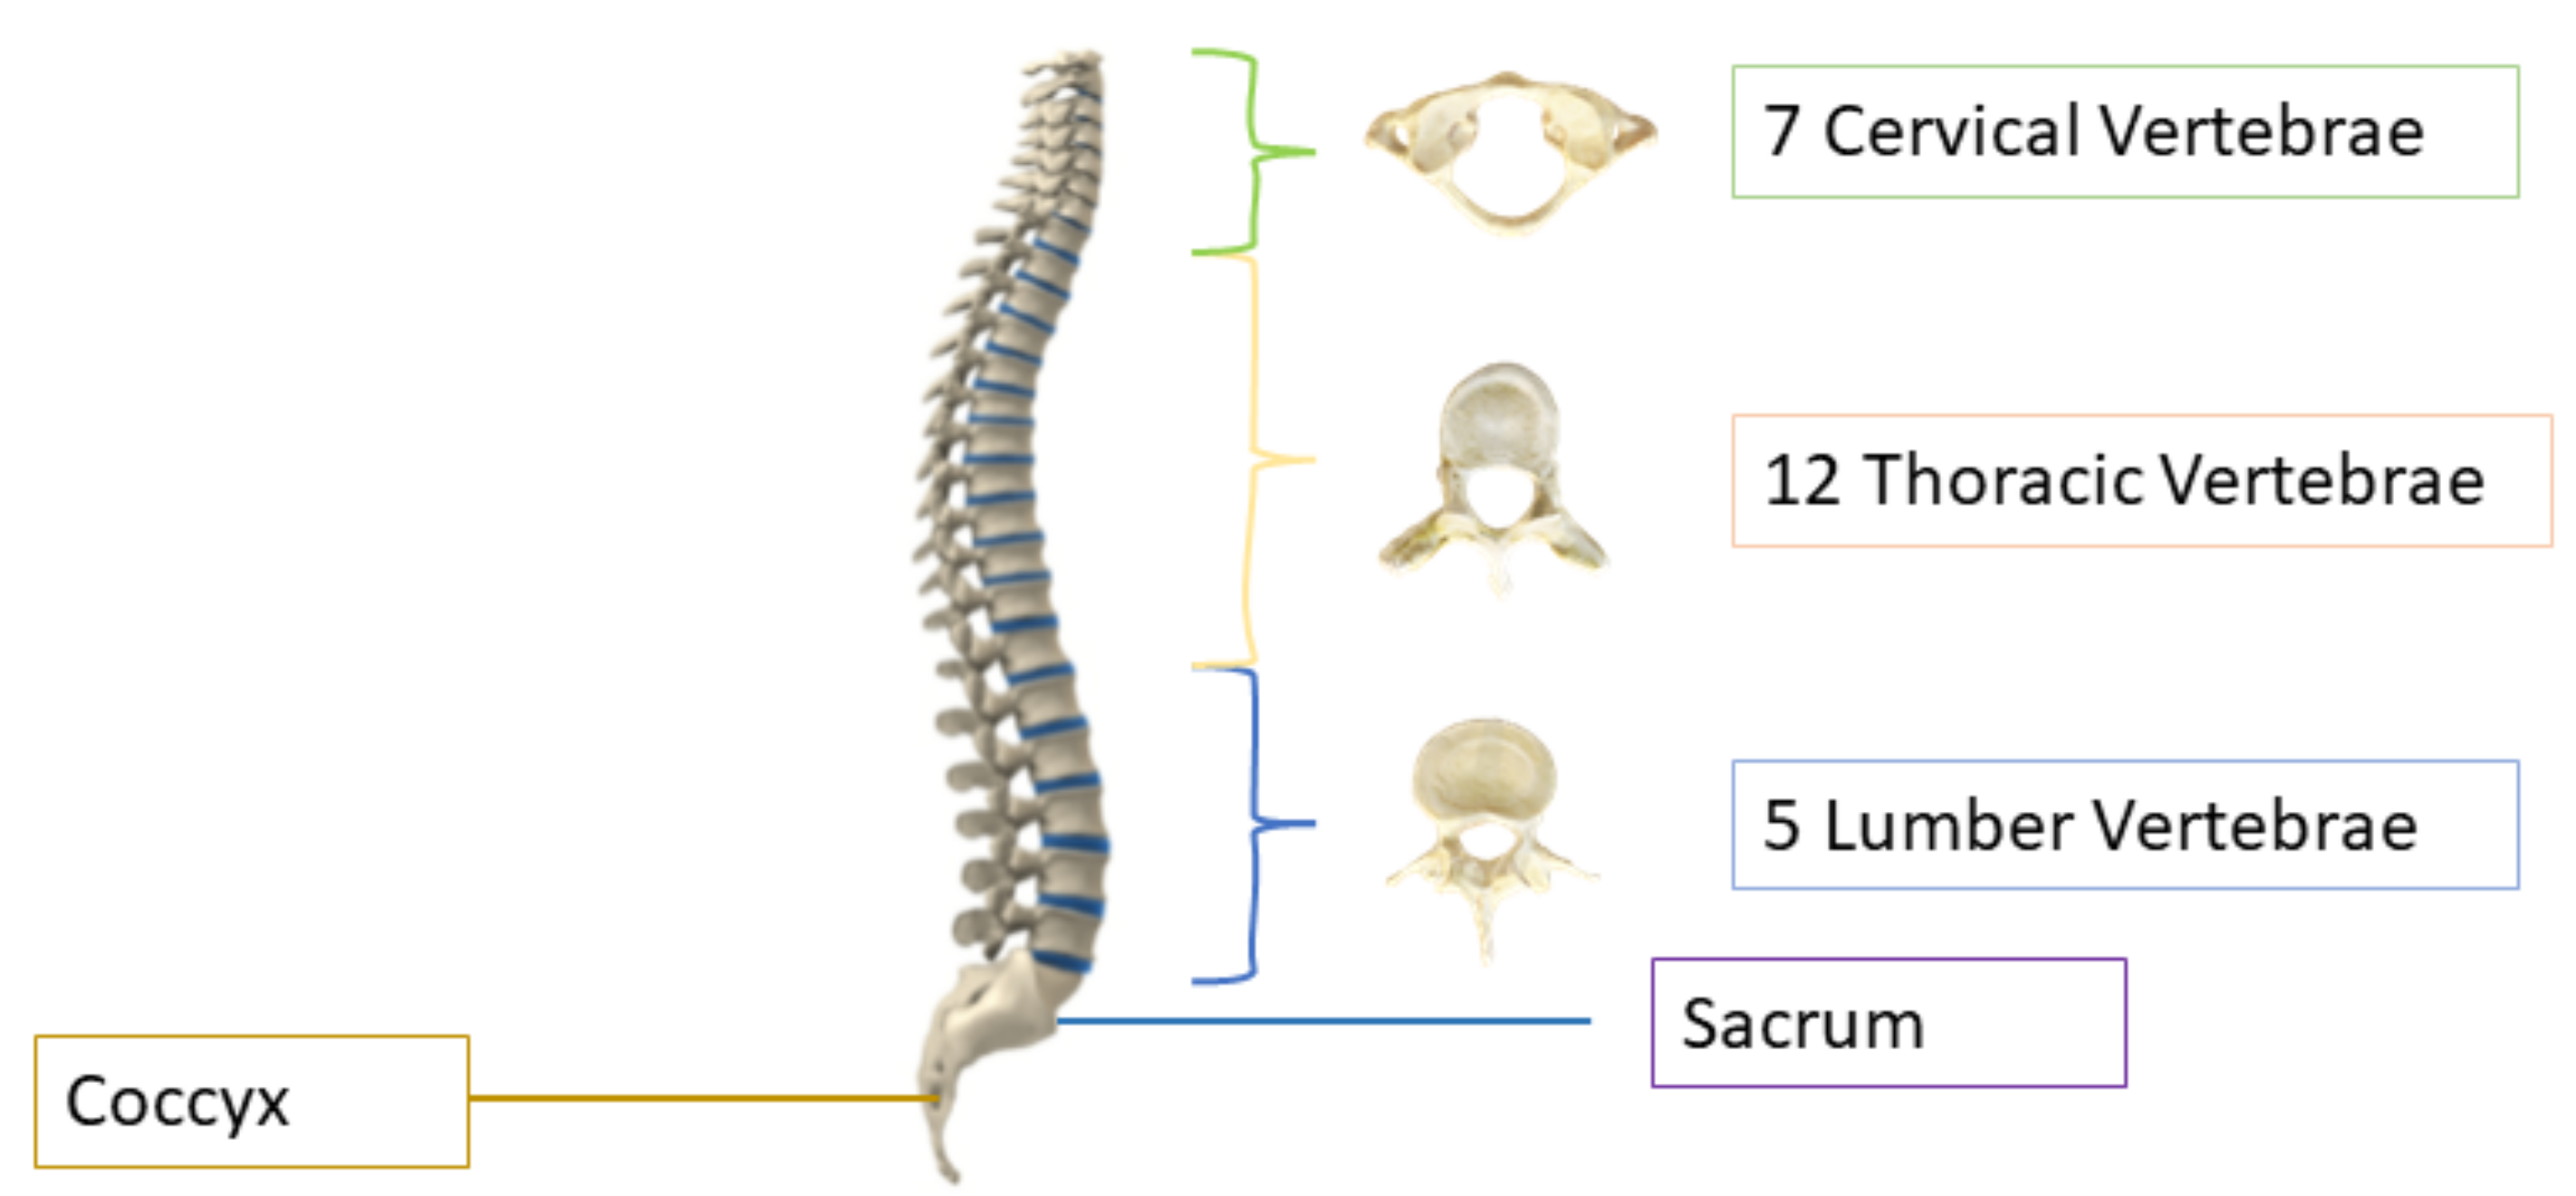 which-combining-form-means-both-spinal-cord-and-bone-marrow-shannon